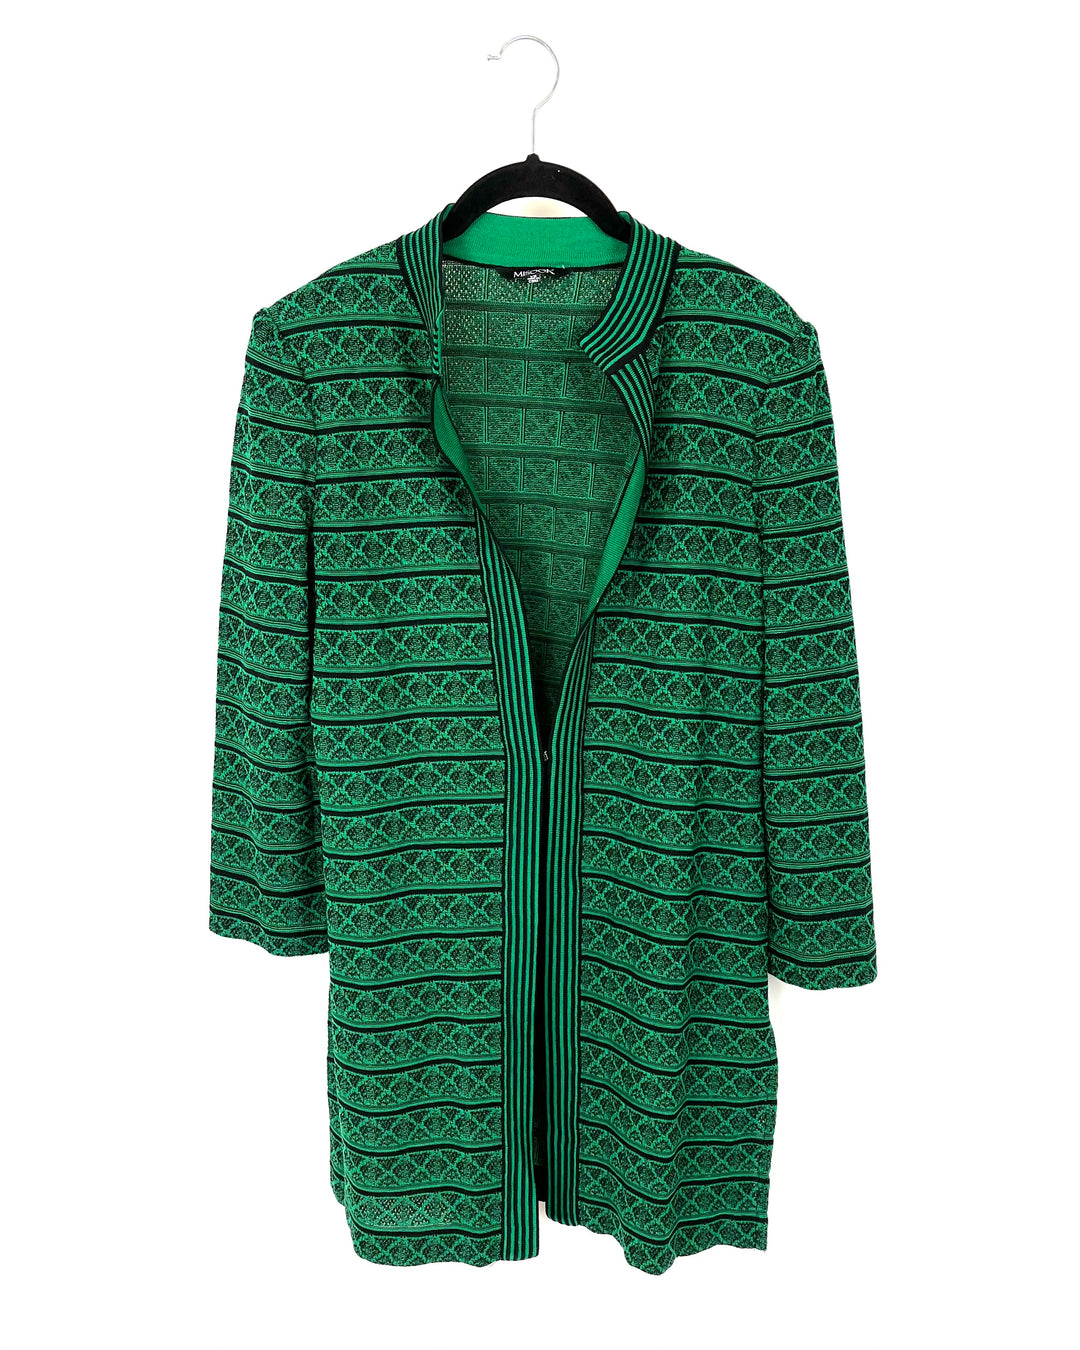 Green And Black Jacket - Size 2-4